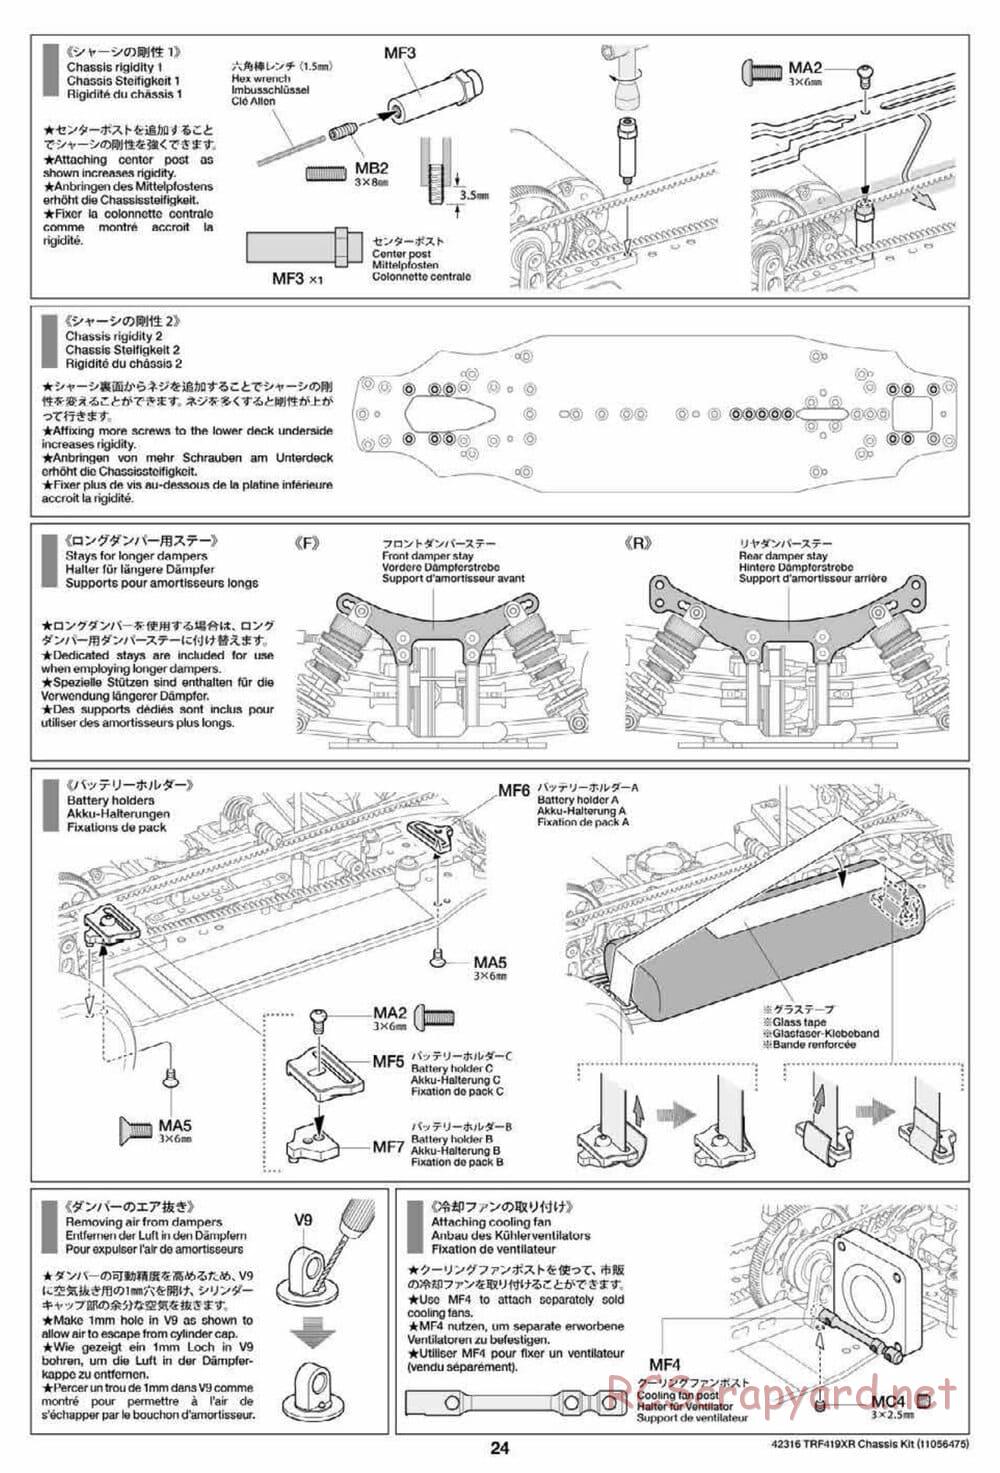 Tamiya - TRF419XR Chassis - Manual - Page 24